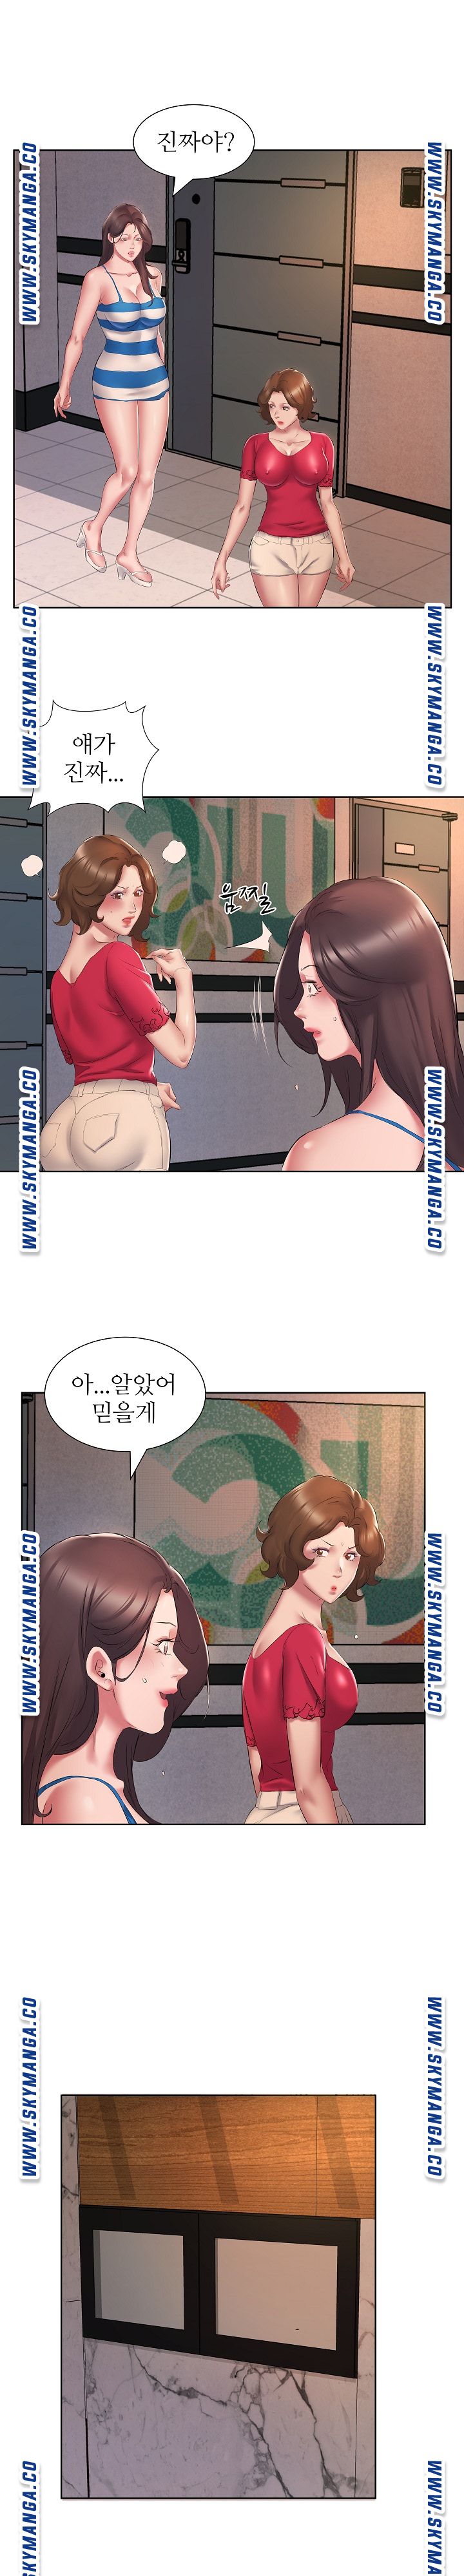 One Room Hotel Raw - Chapter 2 Page 12